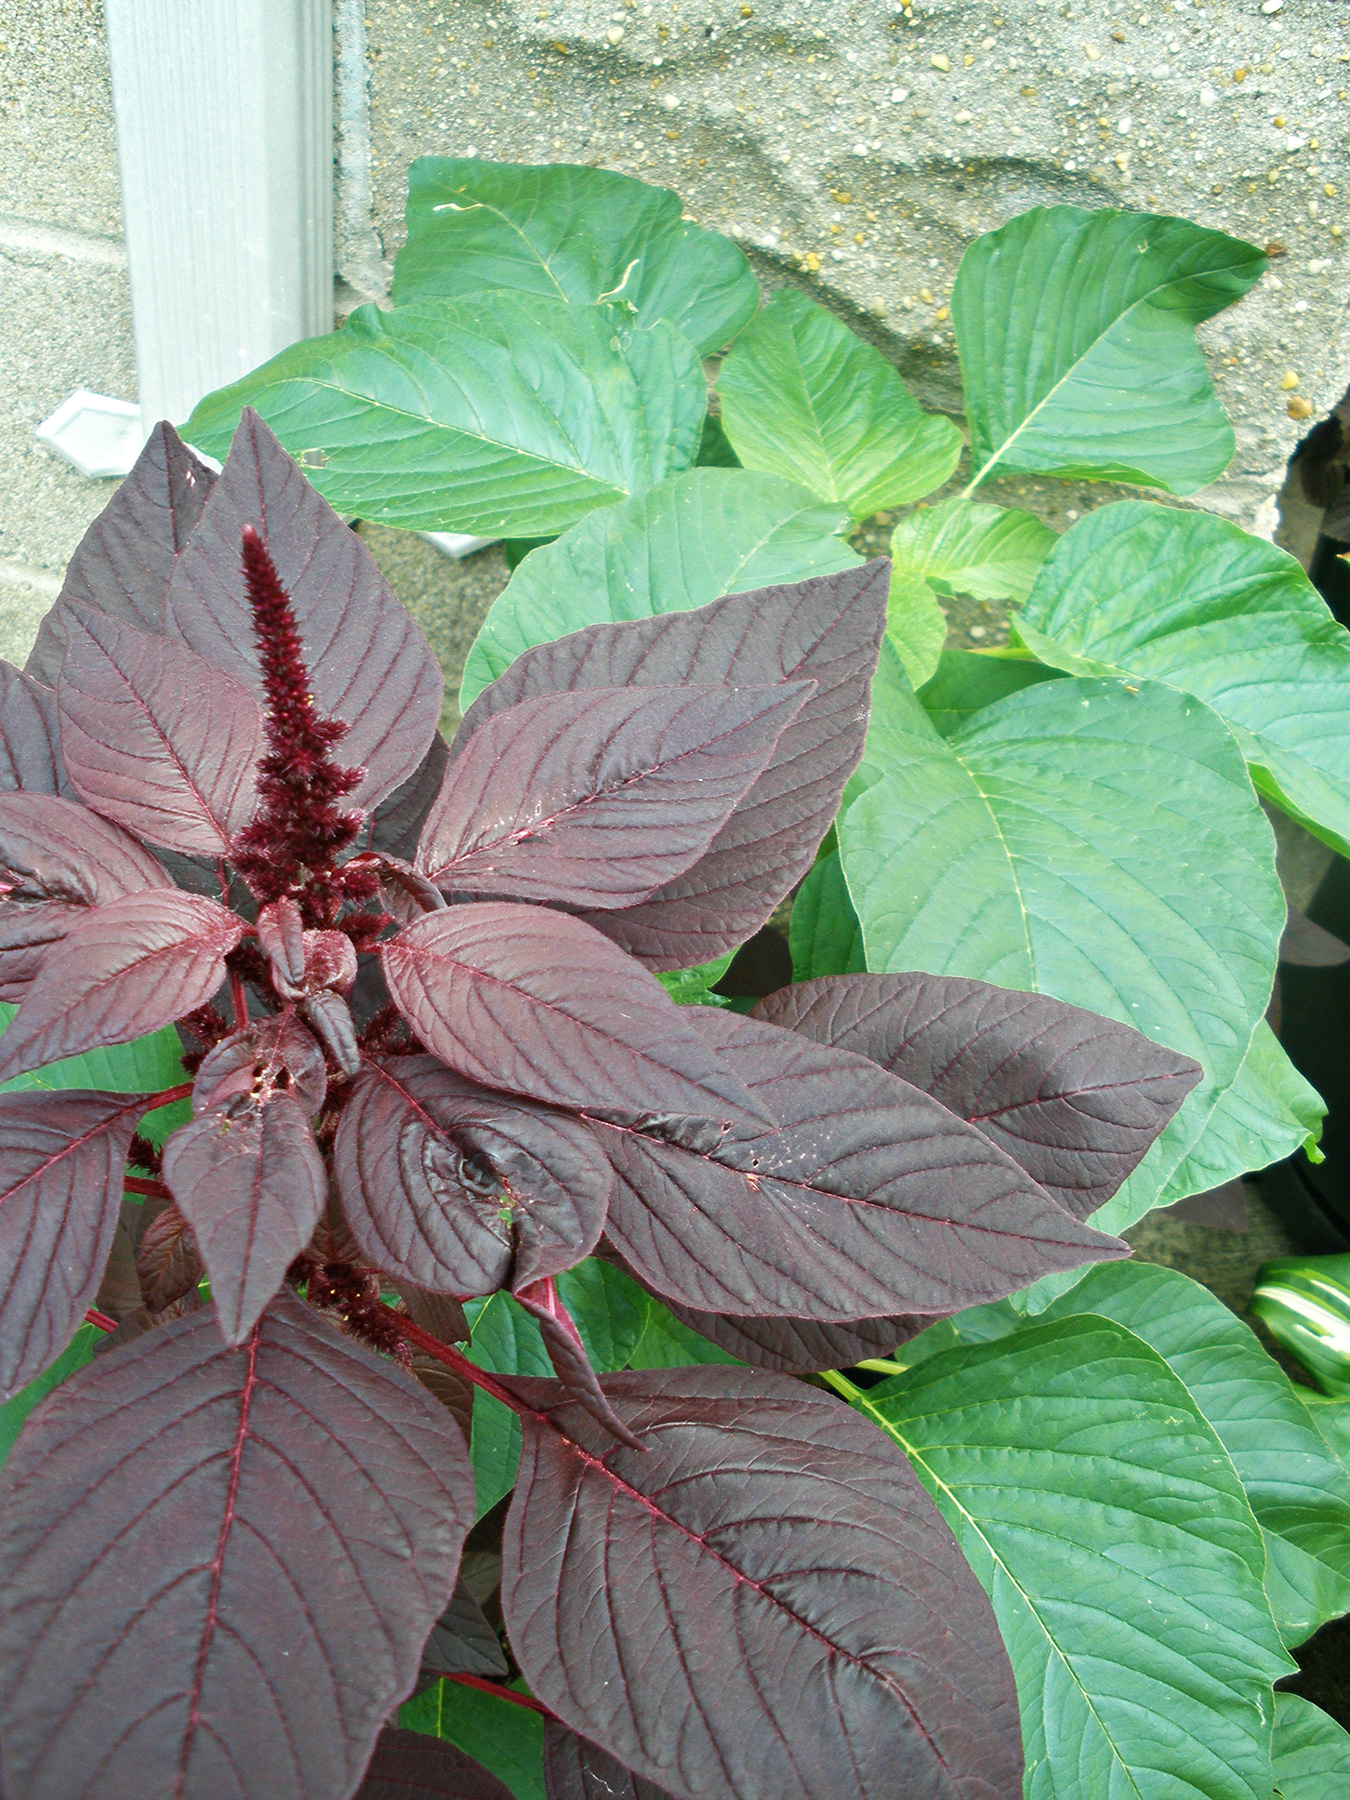 Amaranth: The Herb That Keeps On Giving | Self-Reliance